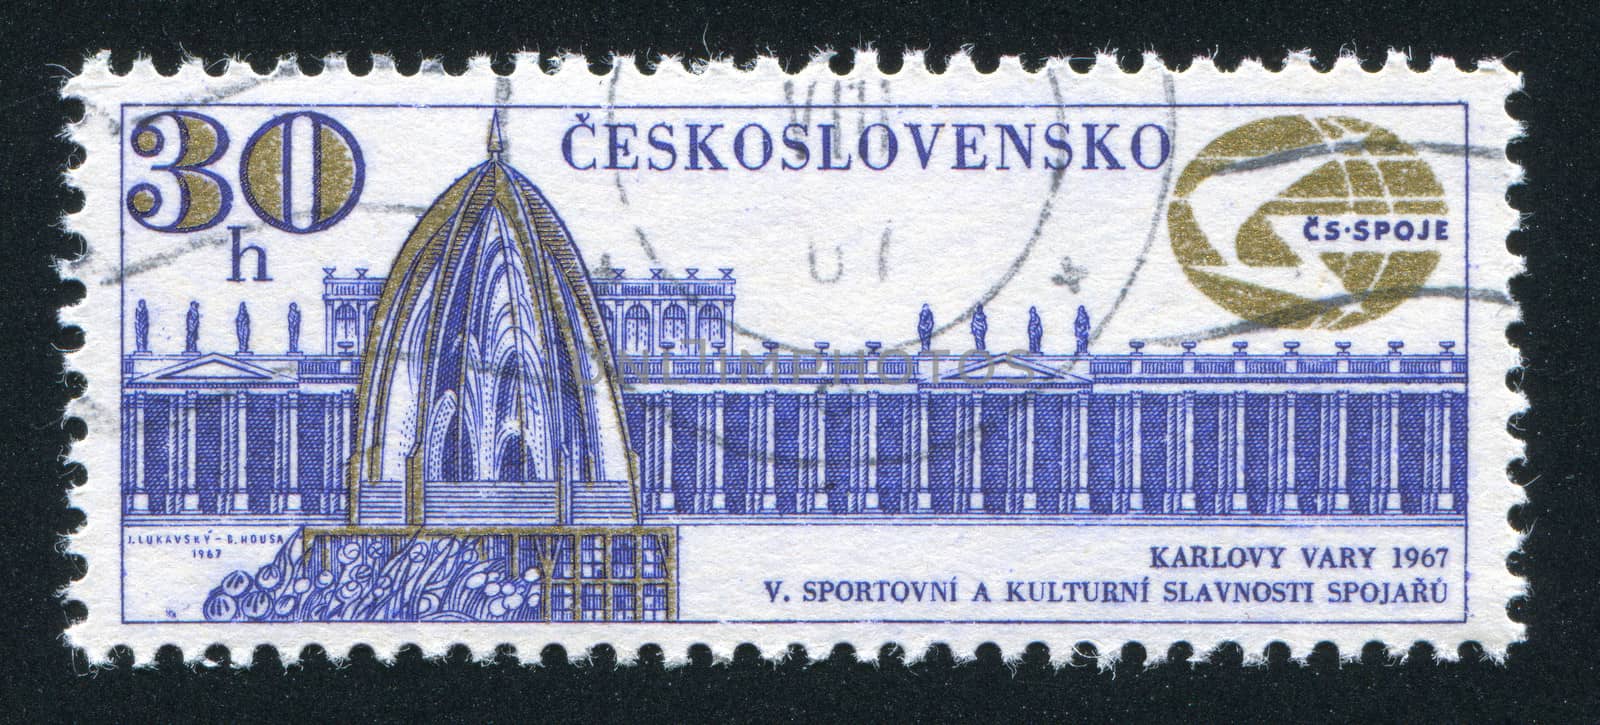 CZECHOSLOVAKIA - CIRCA 1967: stamp printed by Czechoslovakia, shows Colonnade and Spring, Karlovy Vary and Communications Emblem, circa 1967